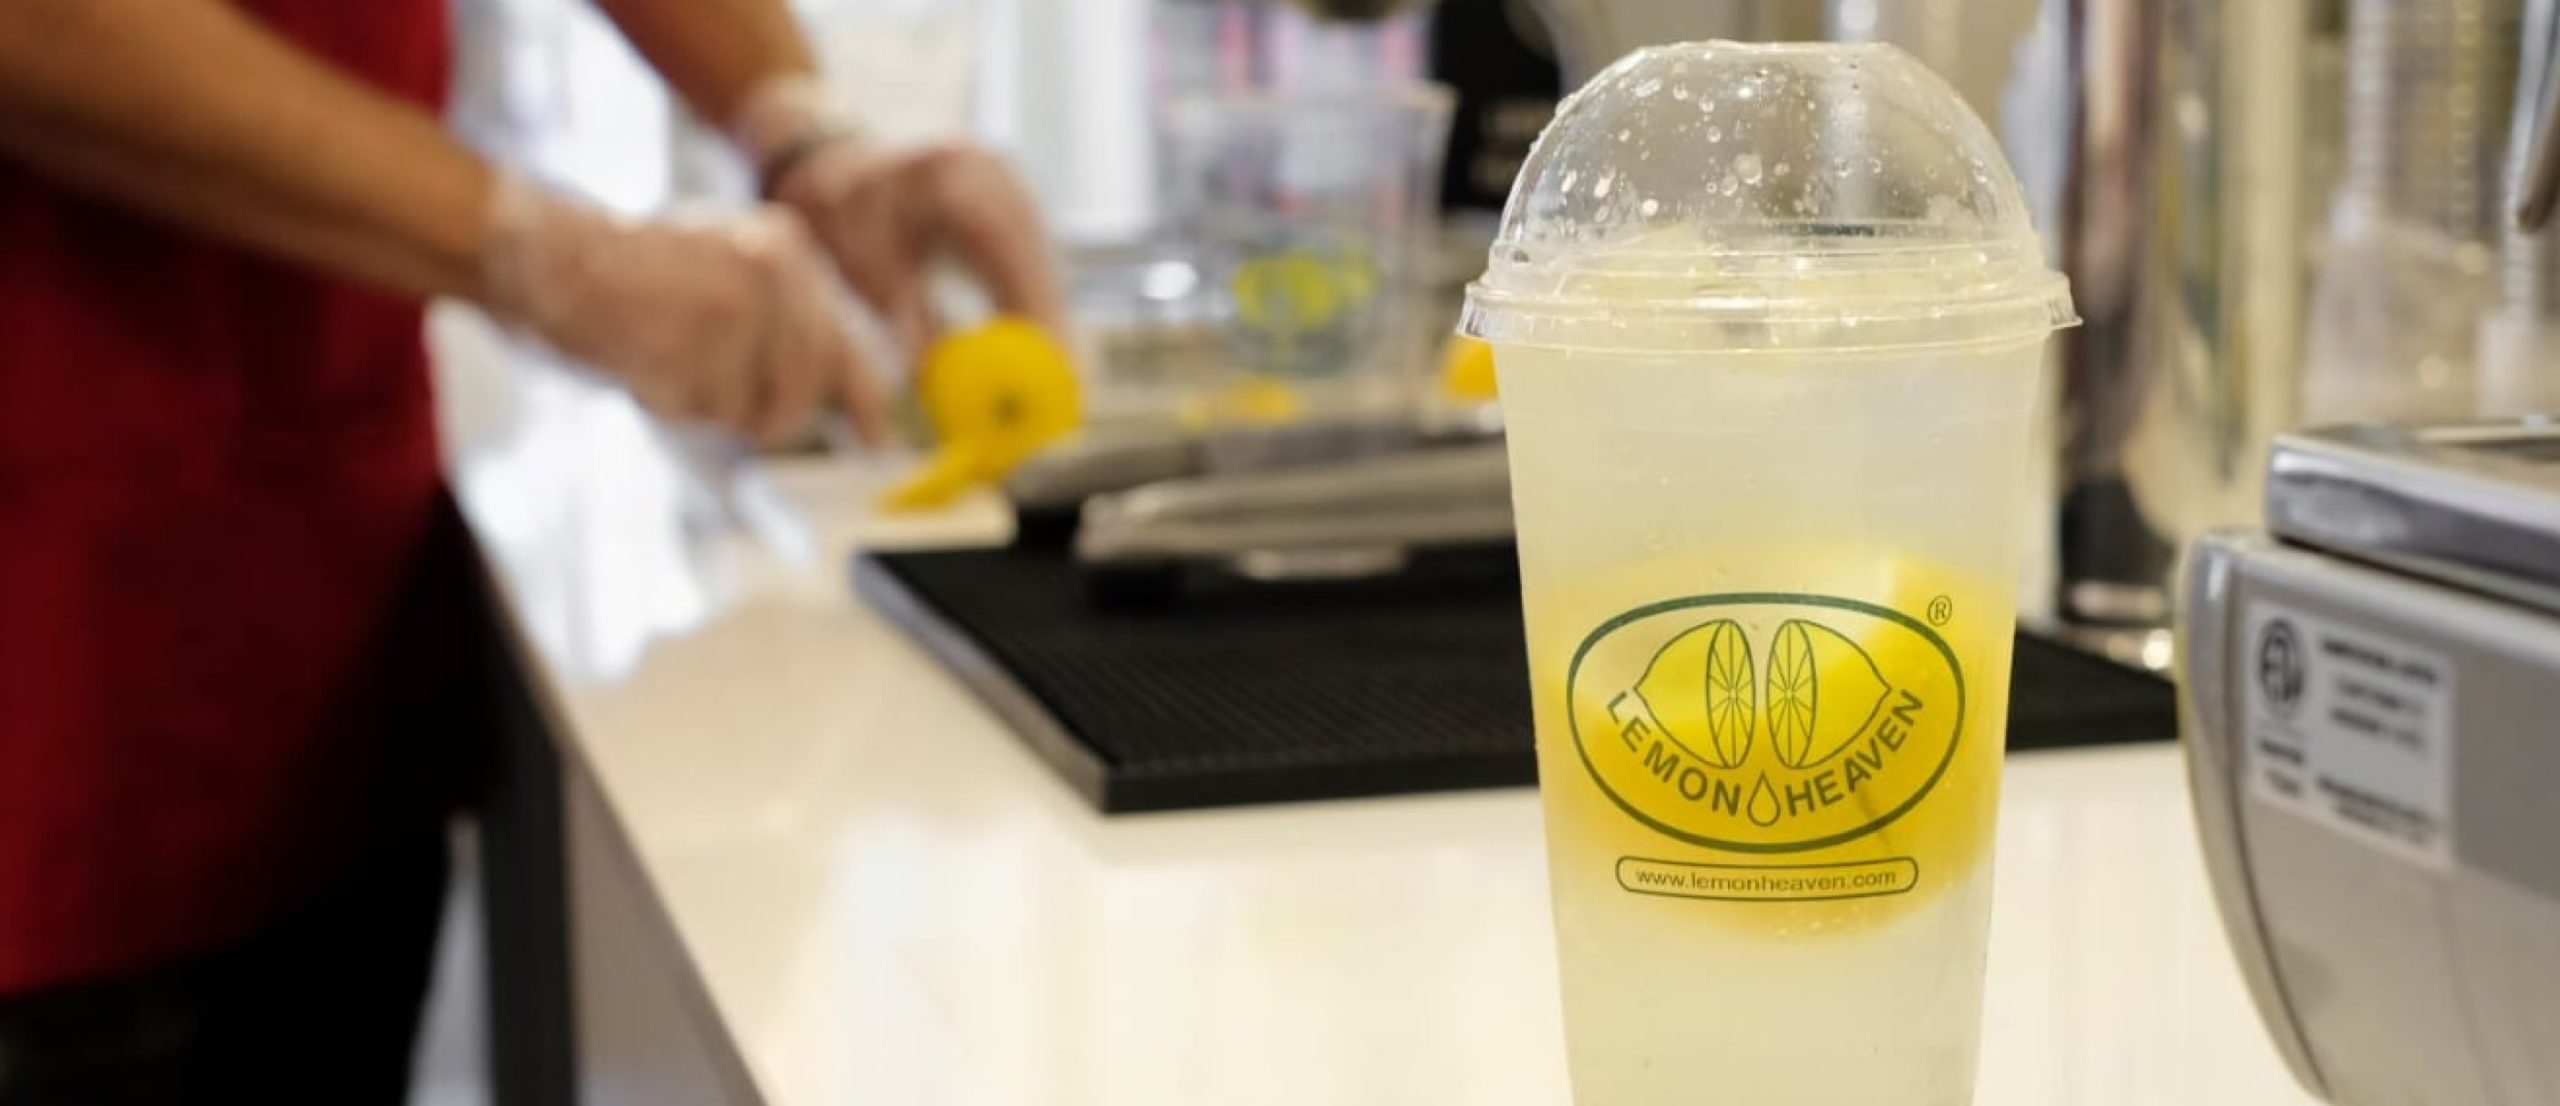 Delight your guests with refreshments from Lemon Heaven